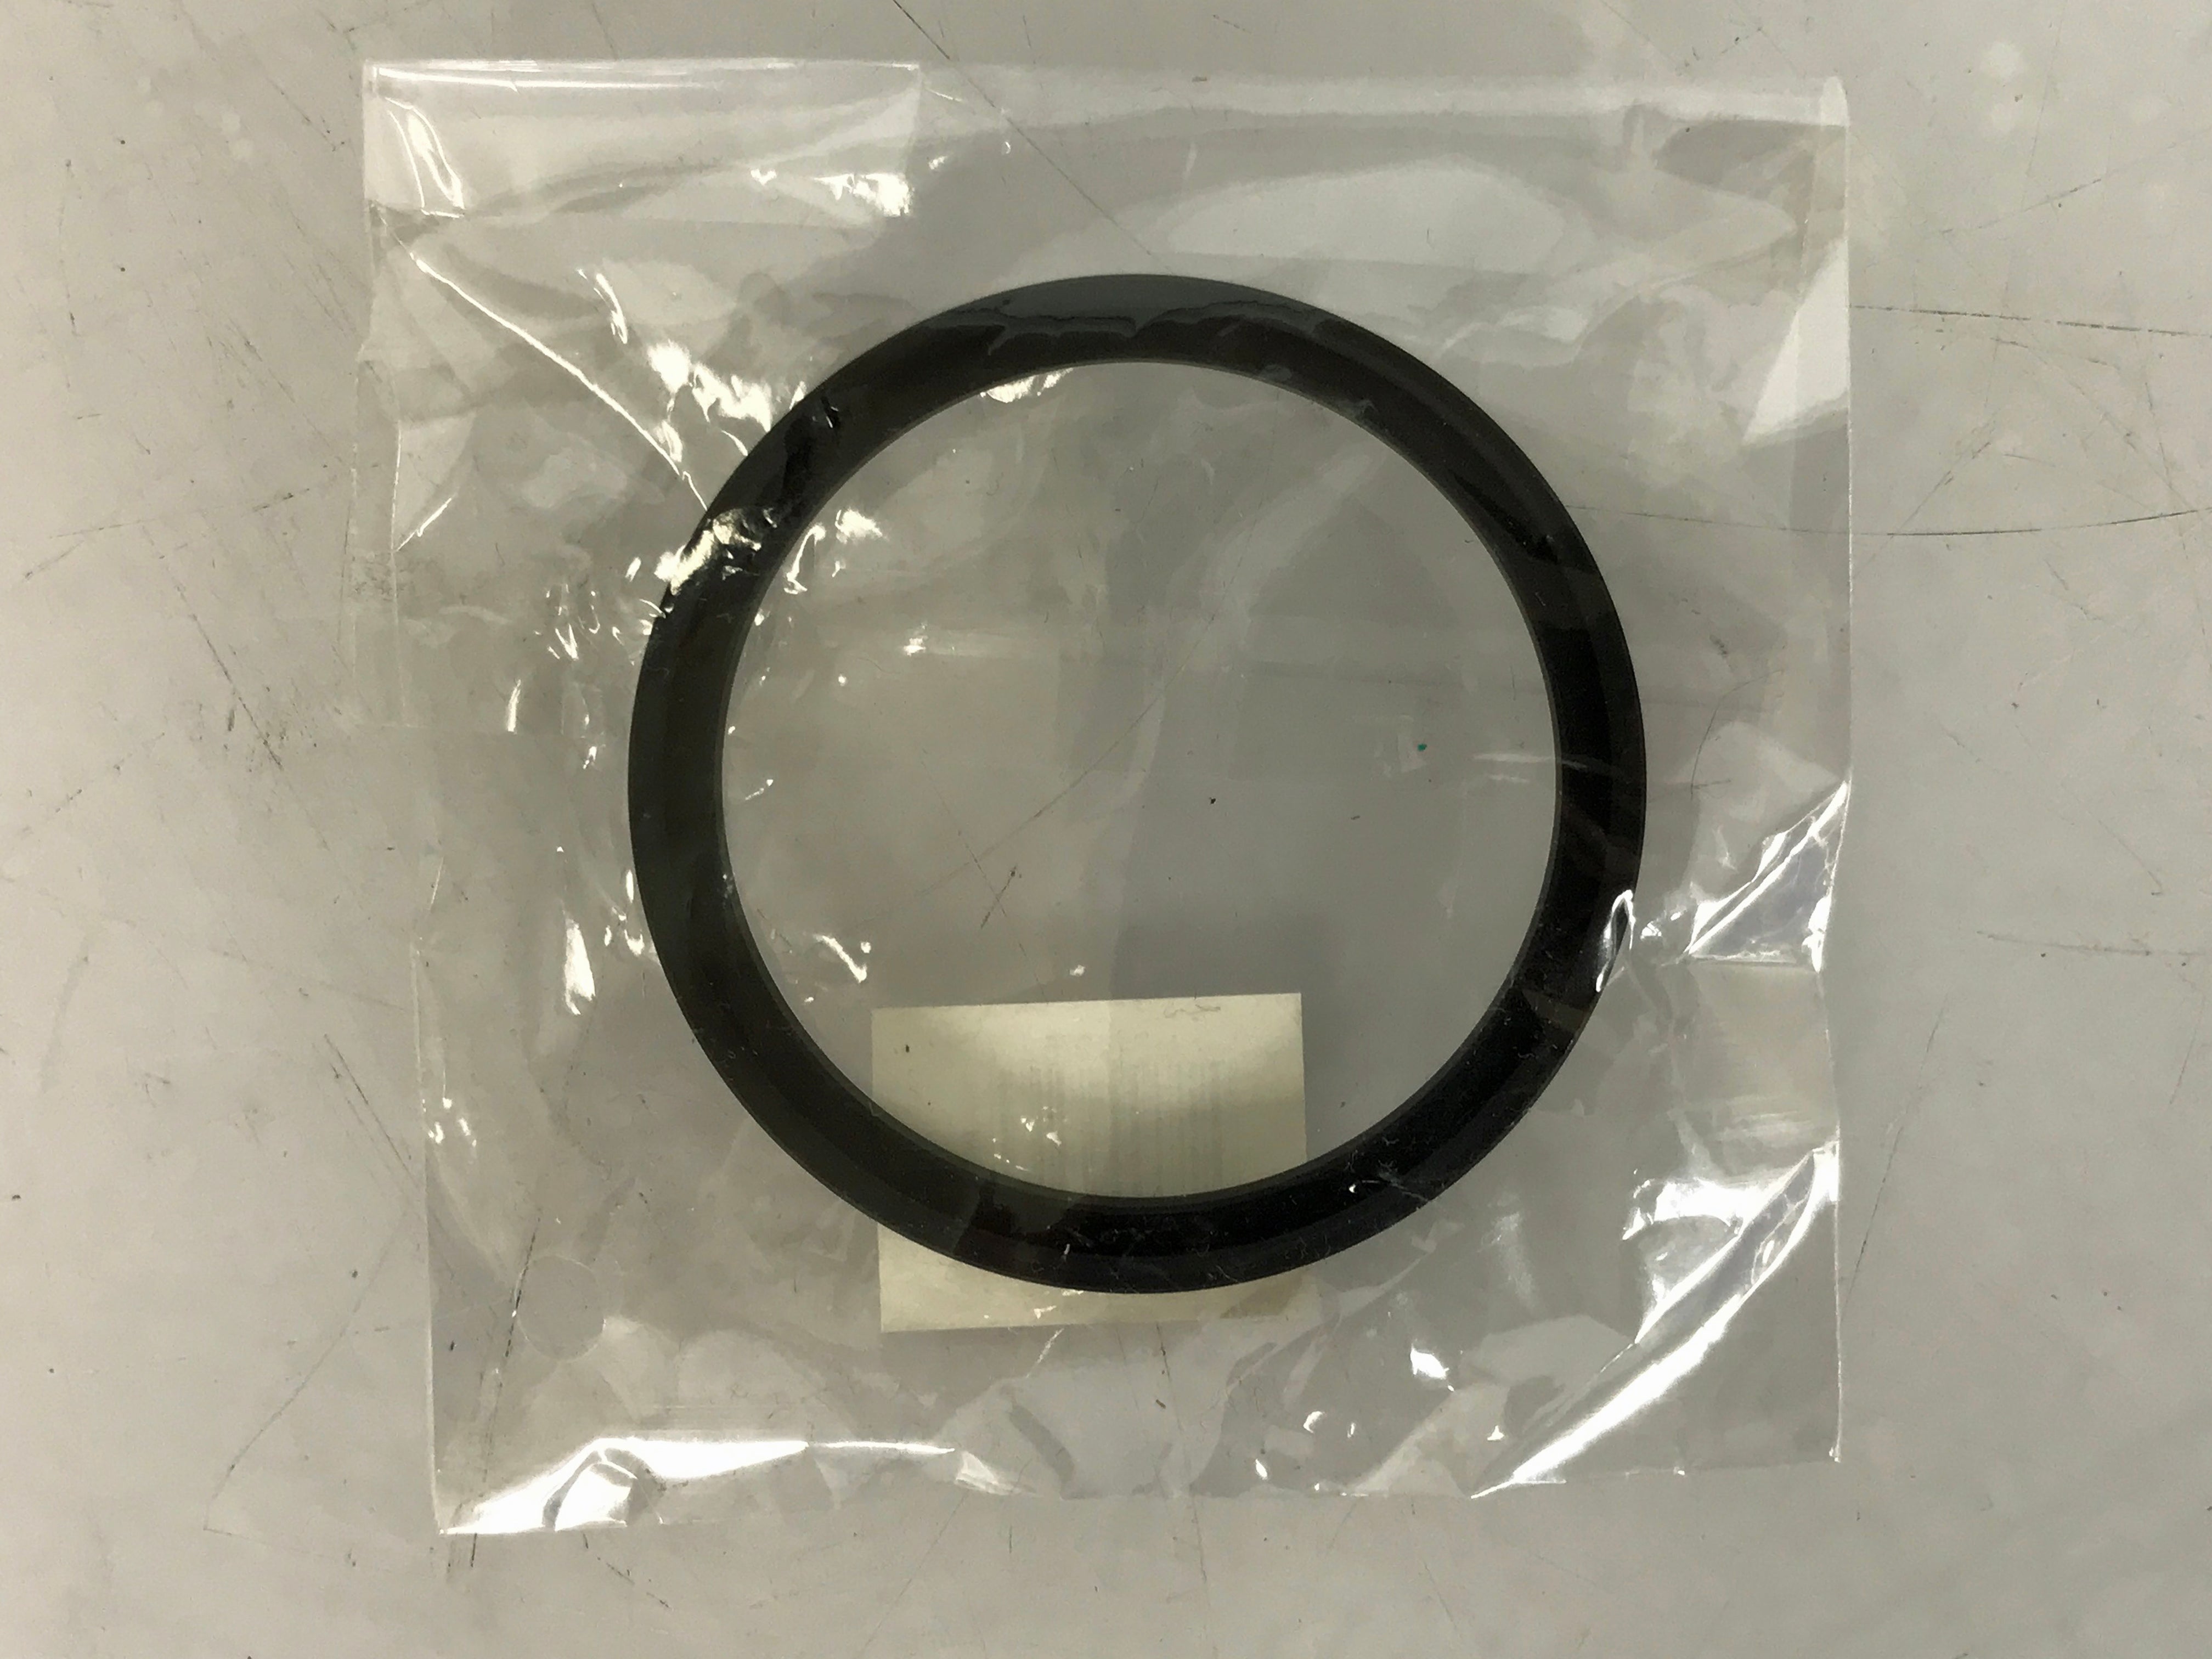 Generic 49-52mm Step Up Ring For Camera Lens